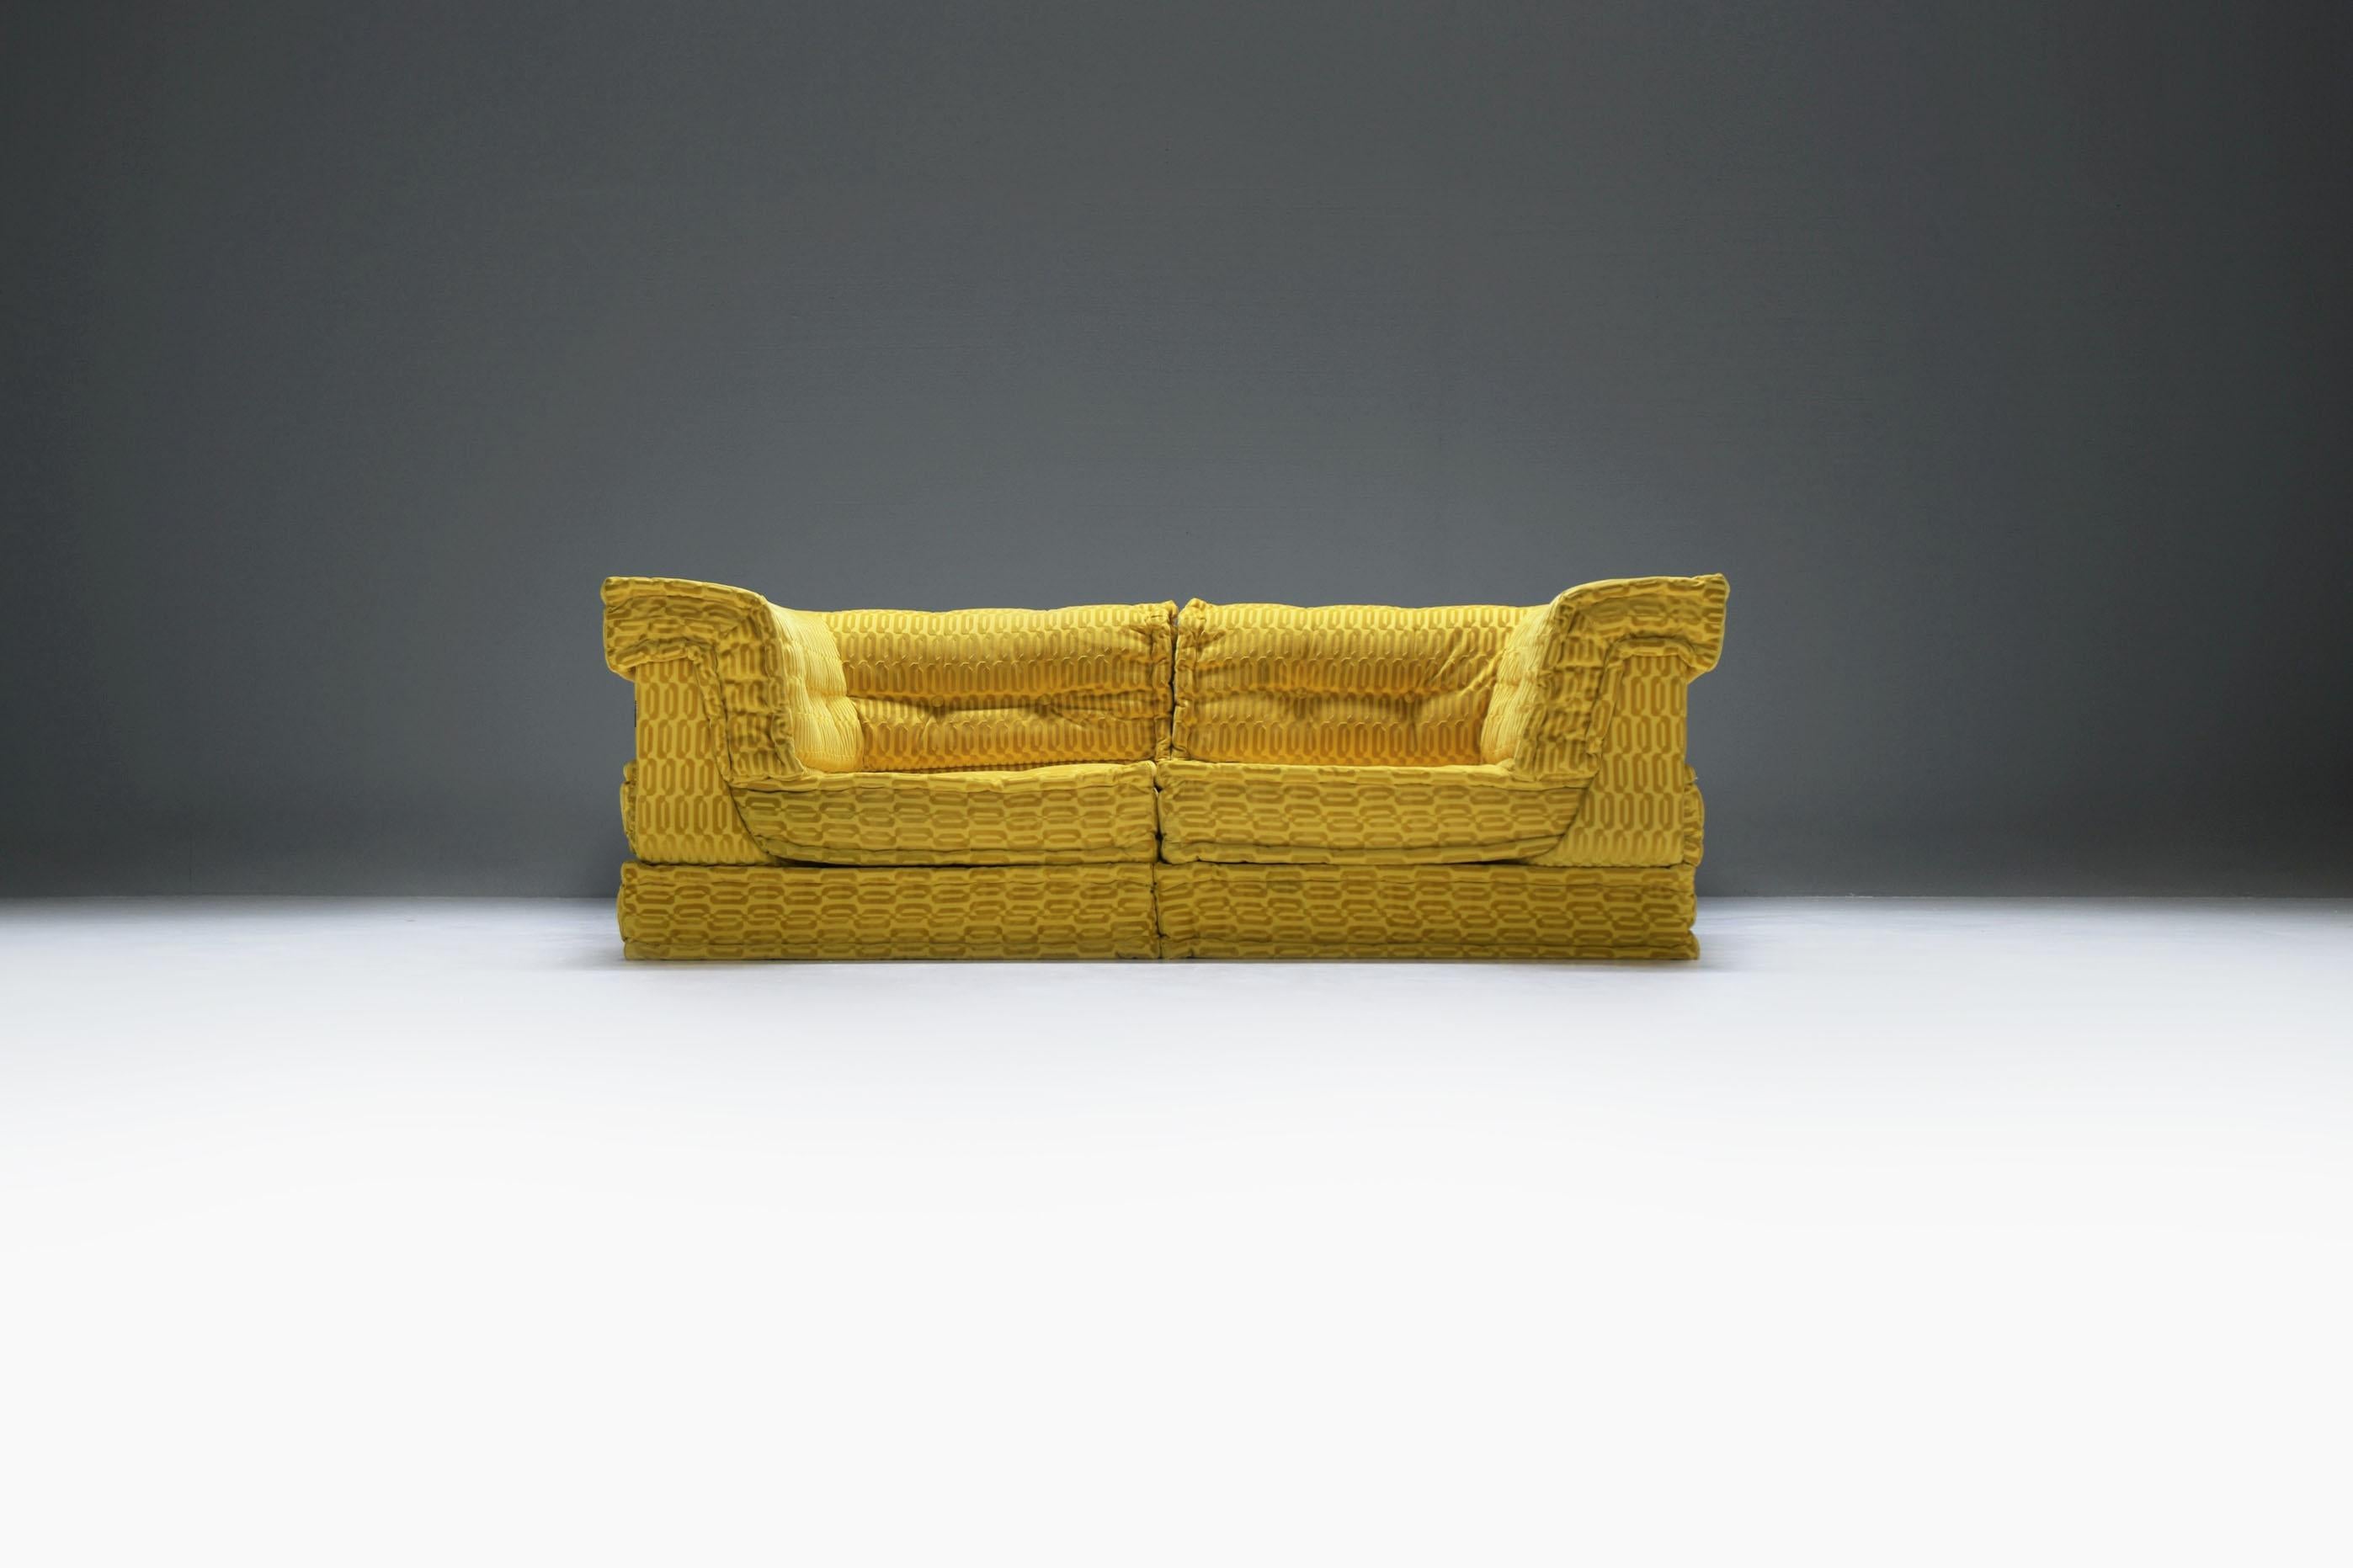 Extremely rare and stunning Mah Jong!  Roche Bobois created this one-of-a-kind sofa for a special client in a custom yellow/gold fabric. The choice of the vibrant yellow/gold fabric adds a touch of luxury and elegance to the piece, making it a